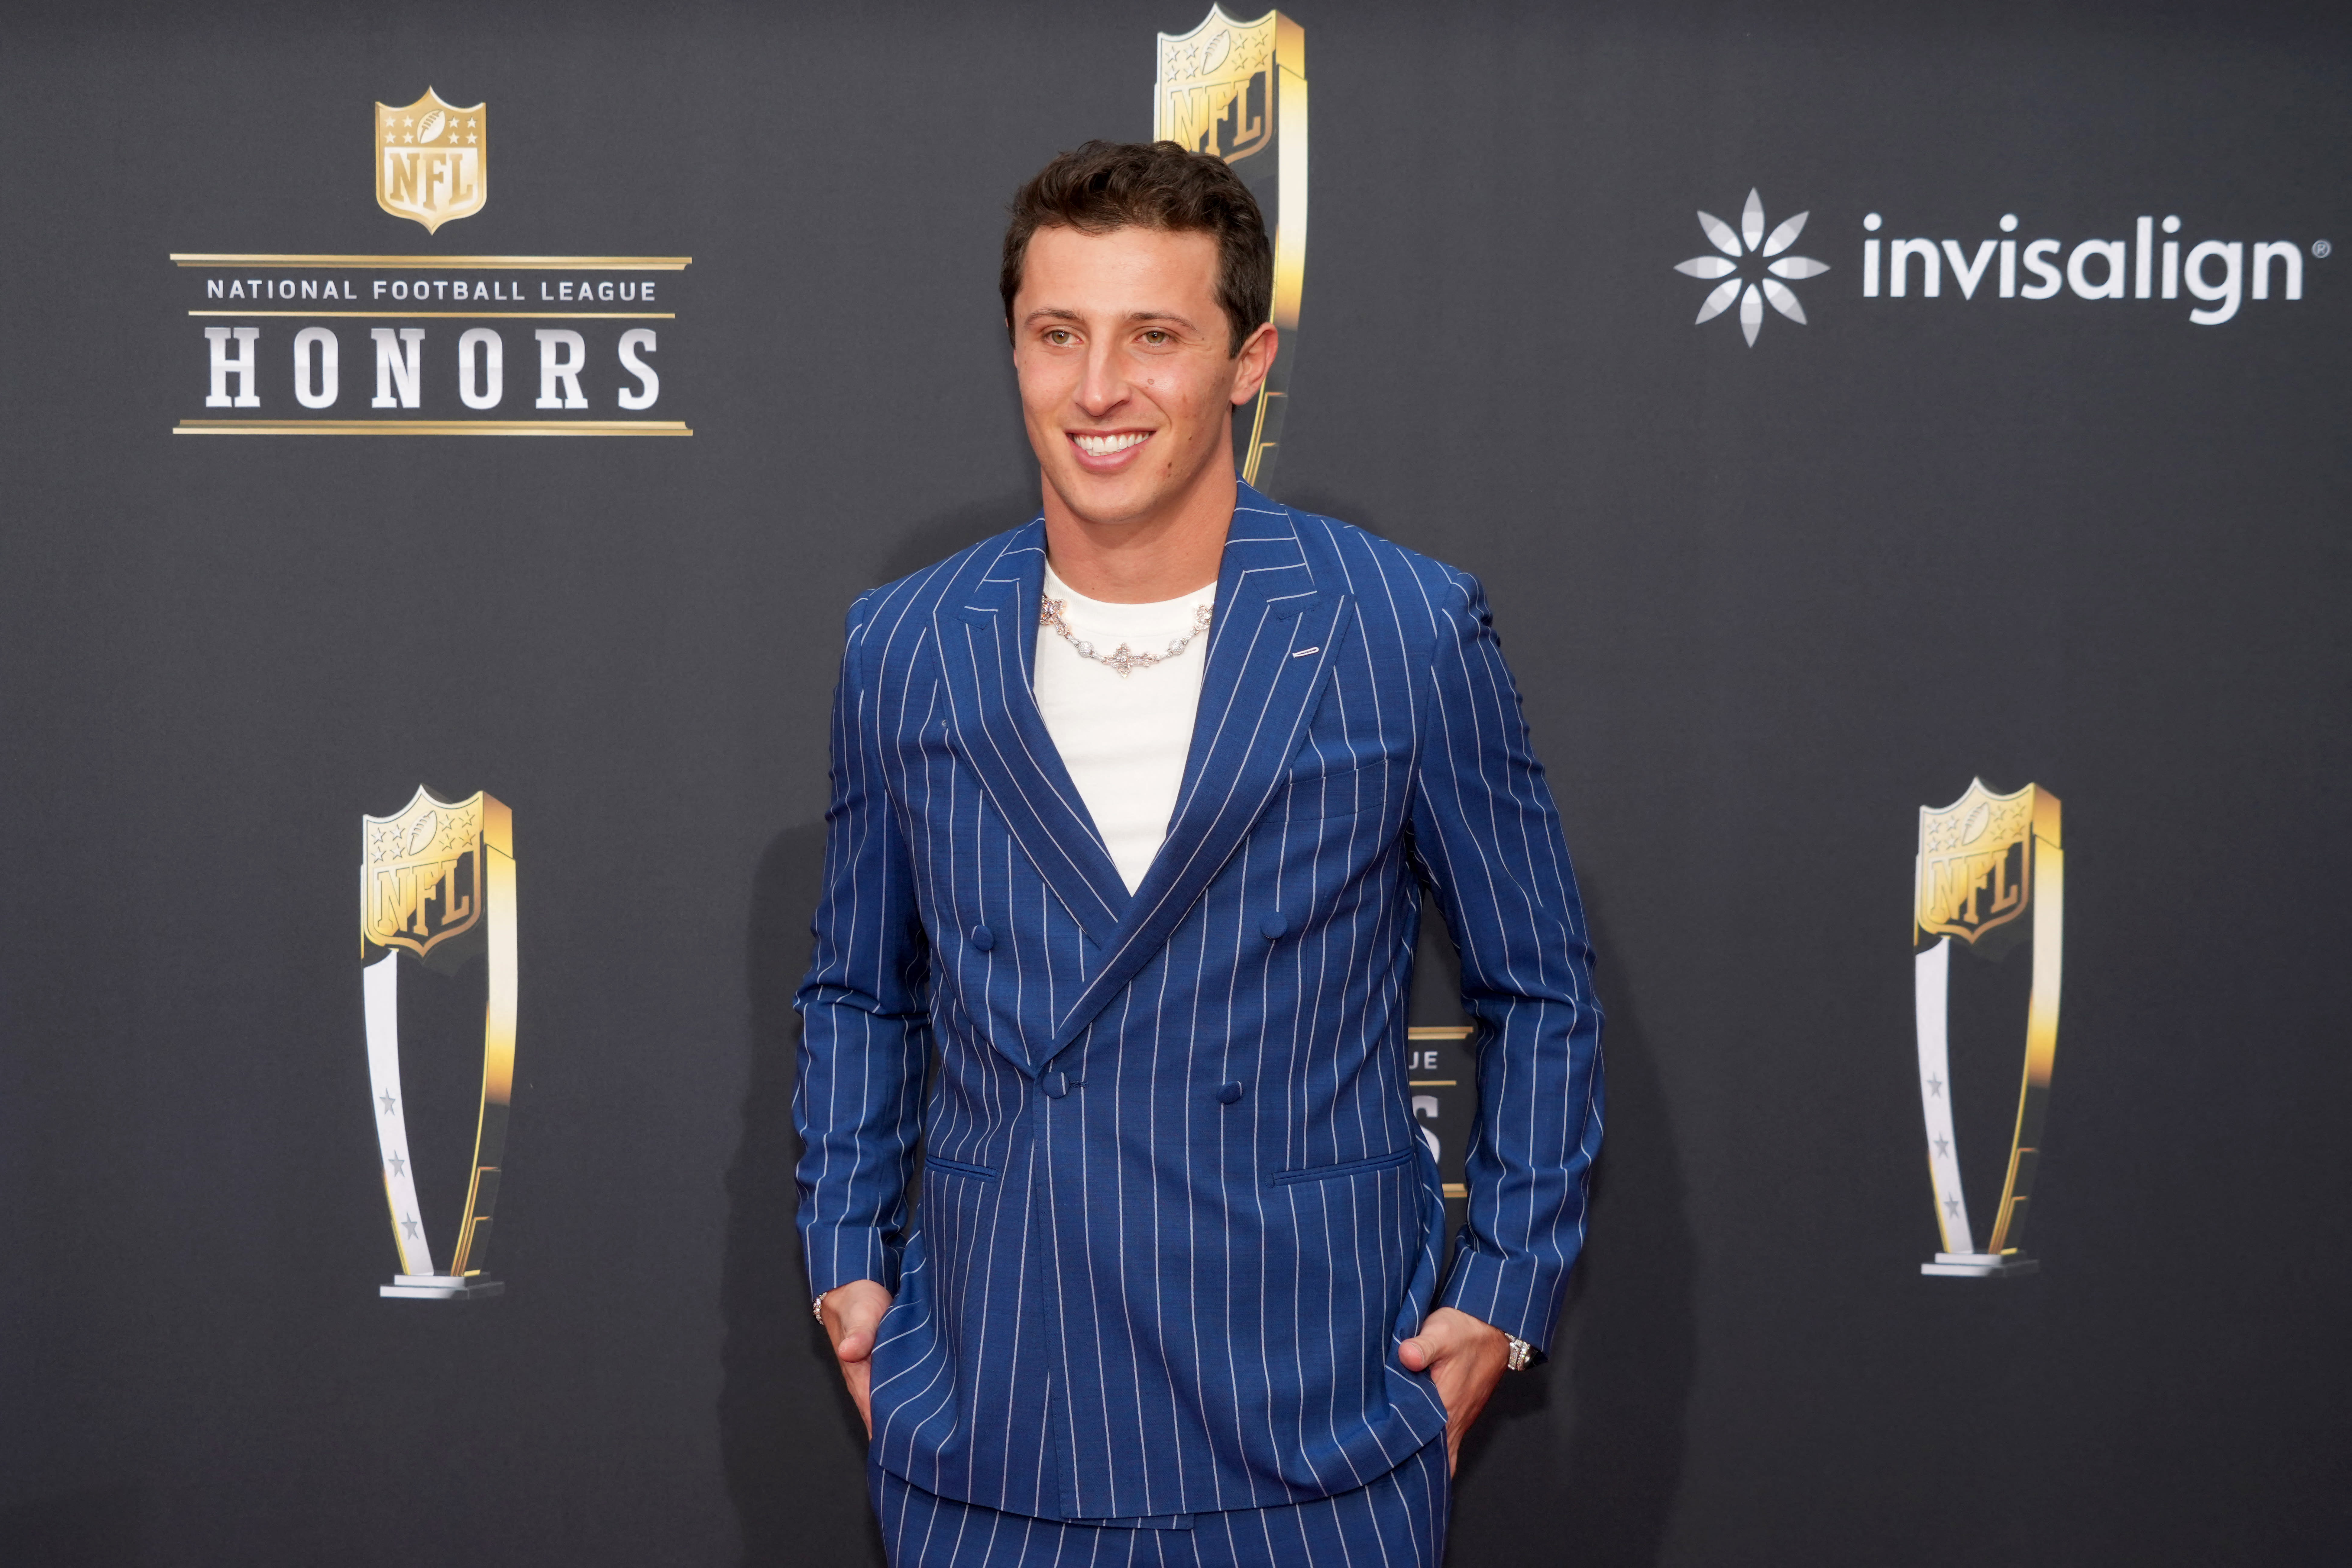 Tommy DeVito says Jets quarterback ‘Aaron Rodgers is my GOAT’